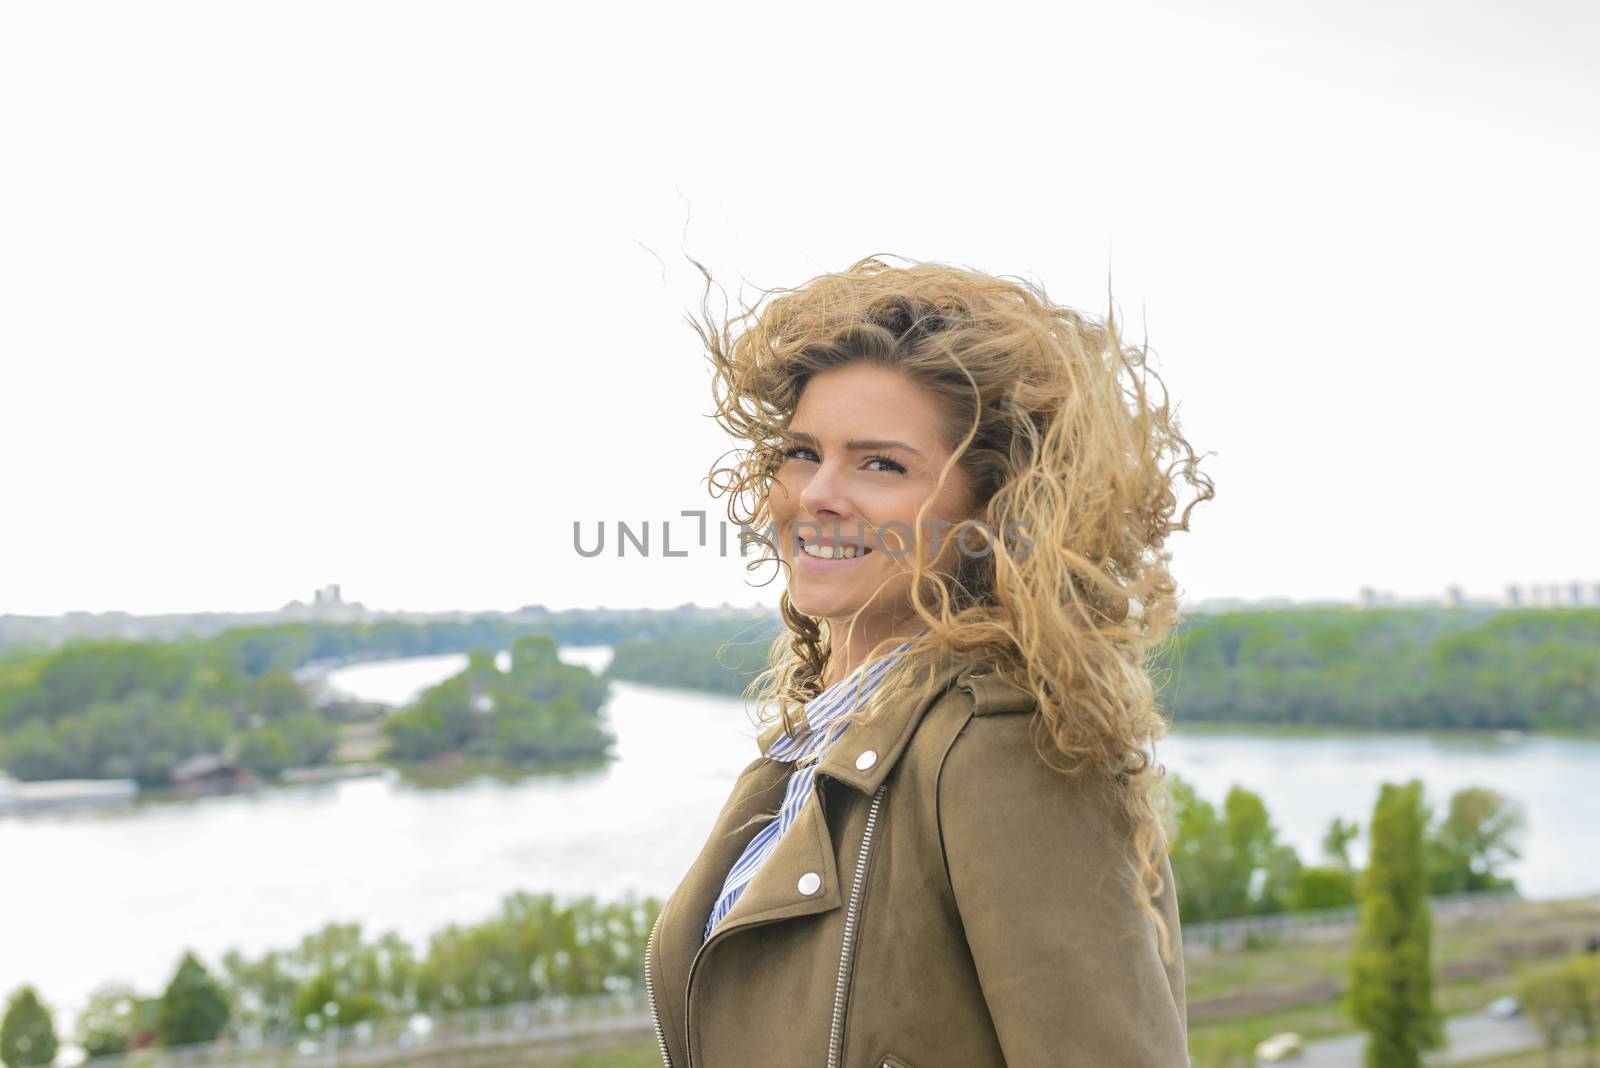 Beautiful long haired woman enjoying the landscape view on a windy cloudy day